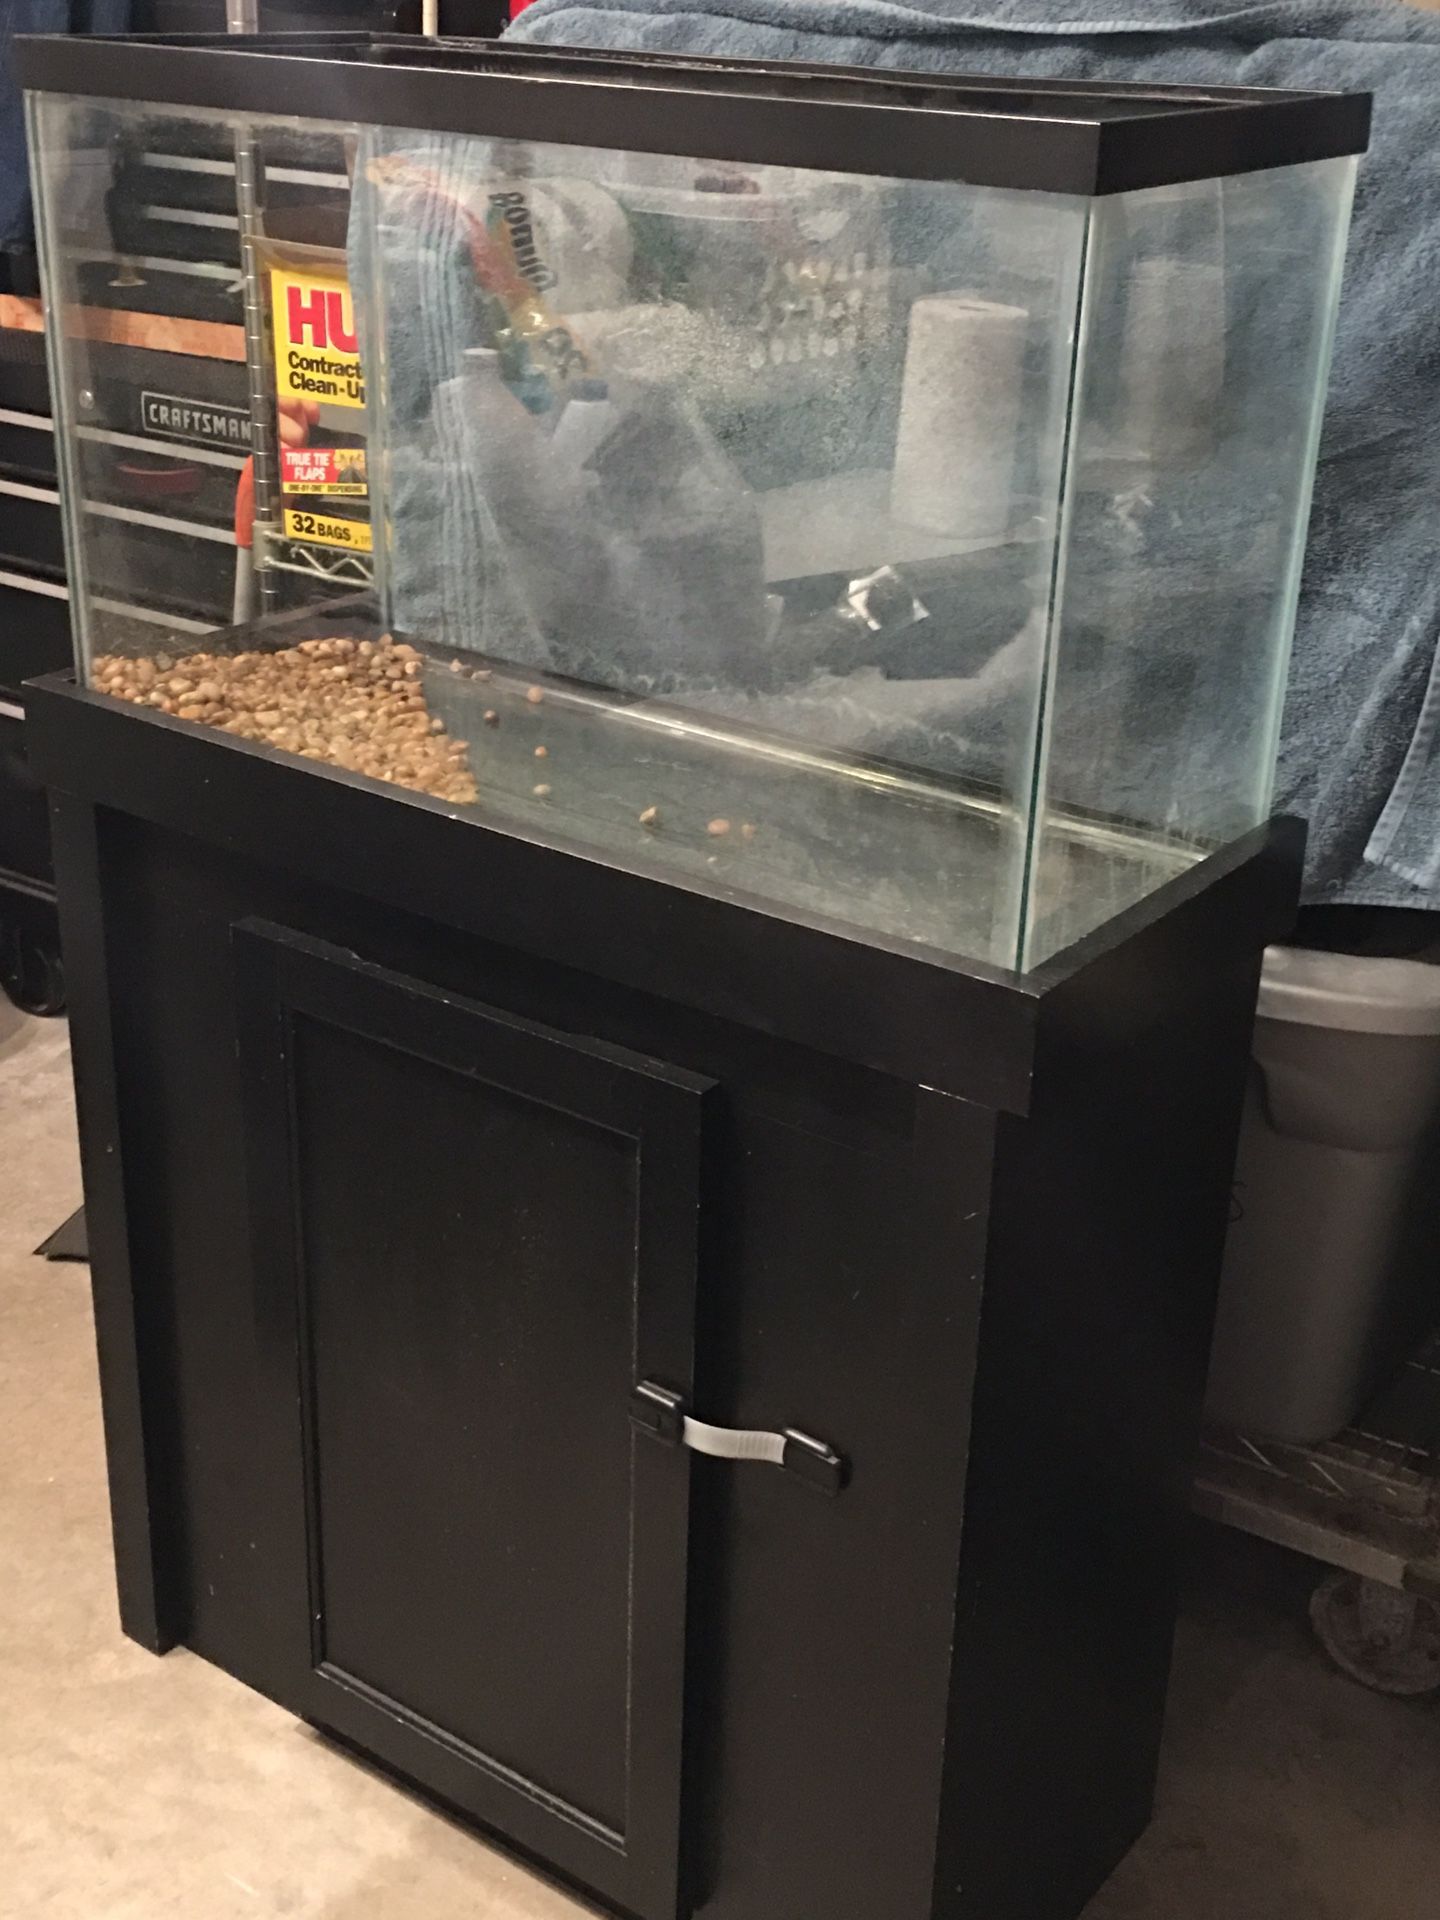 29 gallon fish tank and wood stand.